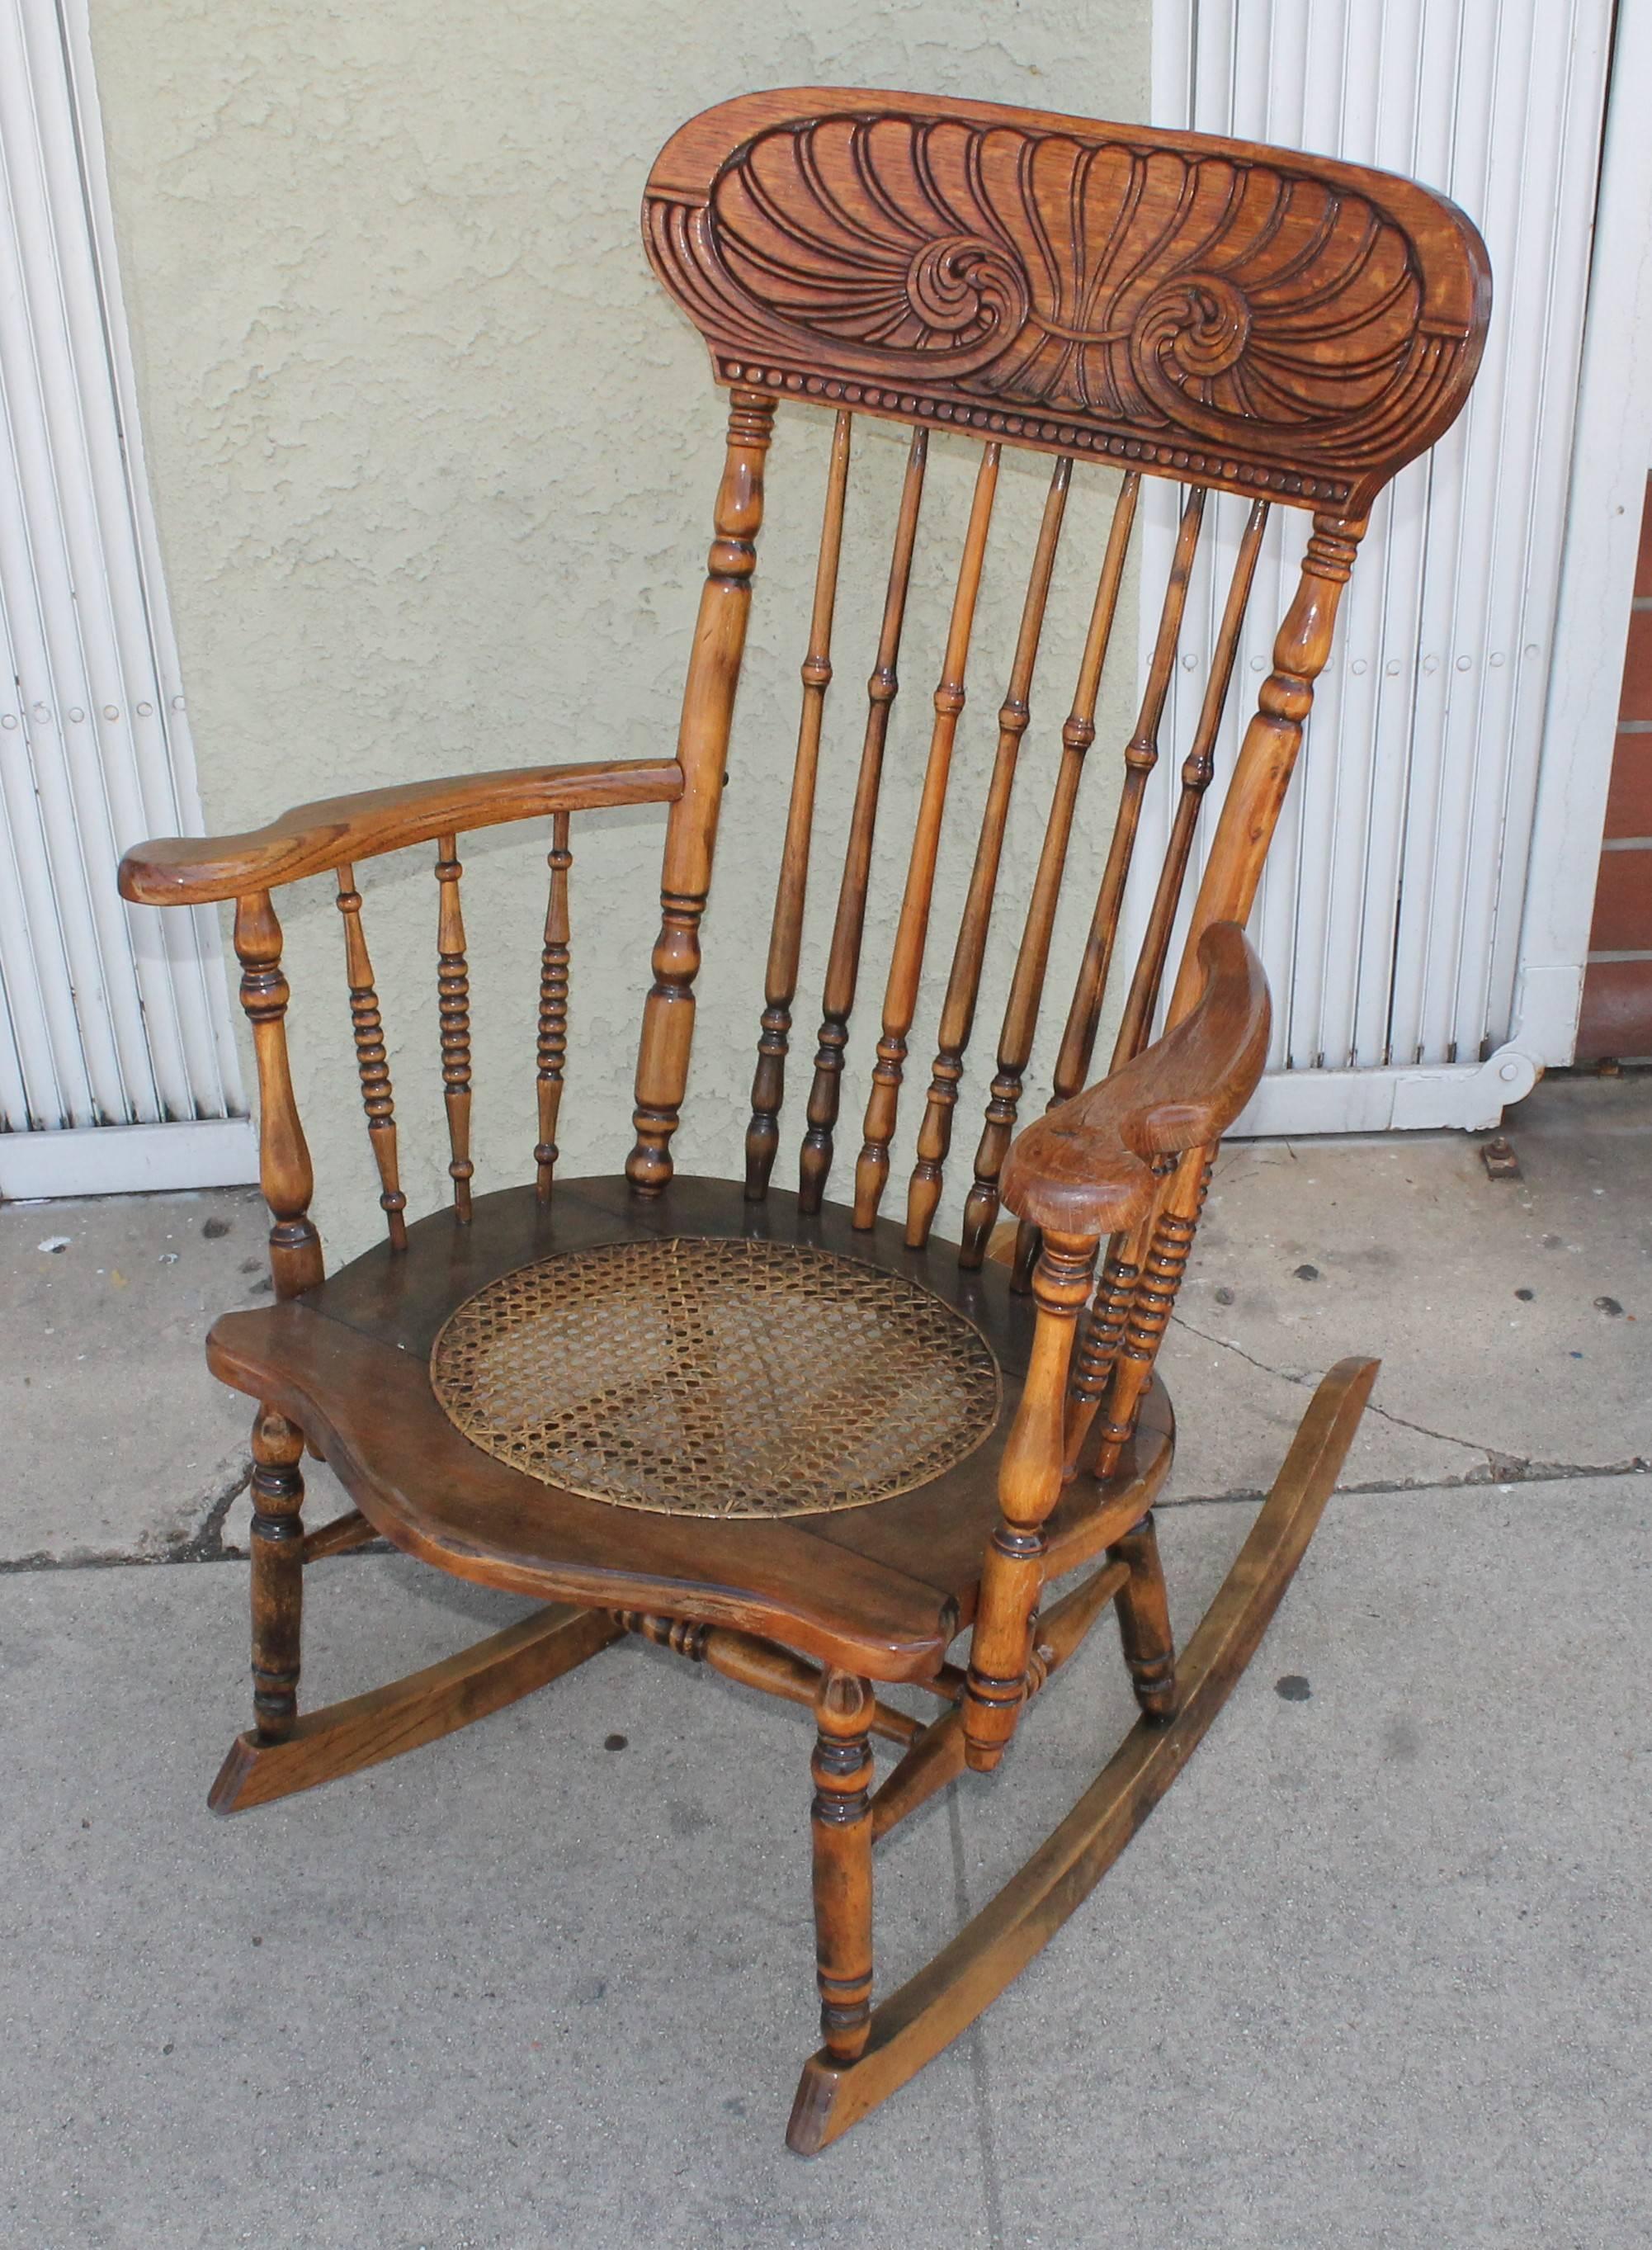 This fine folky press back rocking chair has a wonderful mellow patina and is in fine sturdy condition. The cane seating has been newly finished. There is a coat of all weather protector on this rocking chair. Was on a front porch of a cabin in the